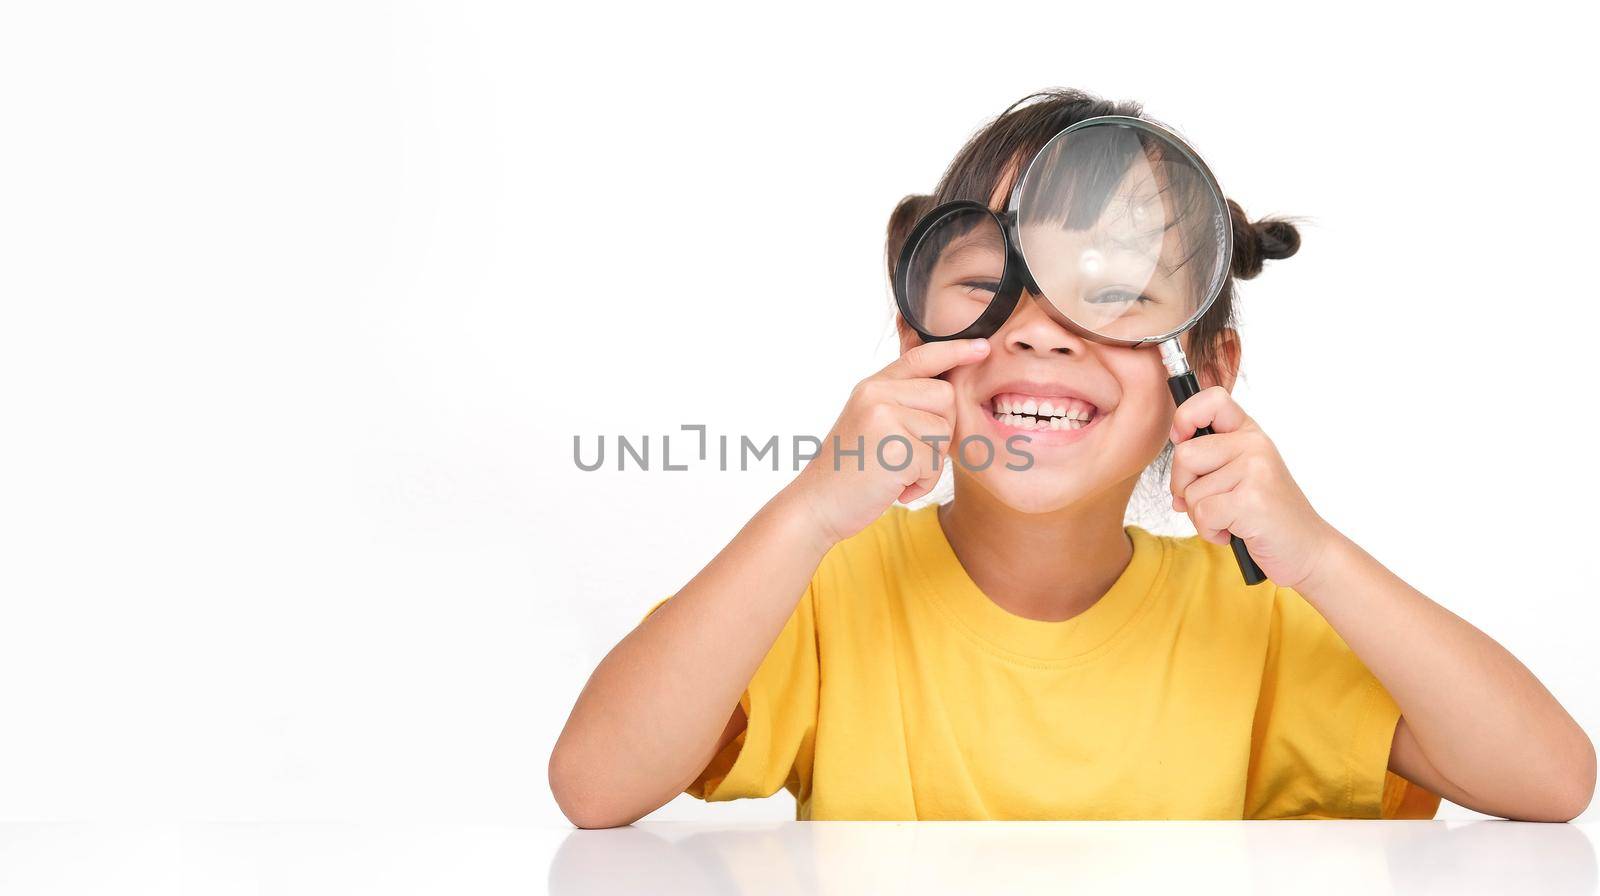 Cute dark haired girl smiling happily holding two magnifying glasses on her eyes isolated on a white background and looking at the camera. by TEERASAK